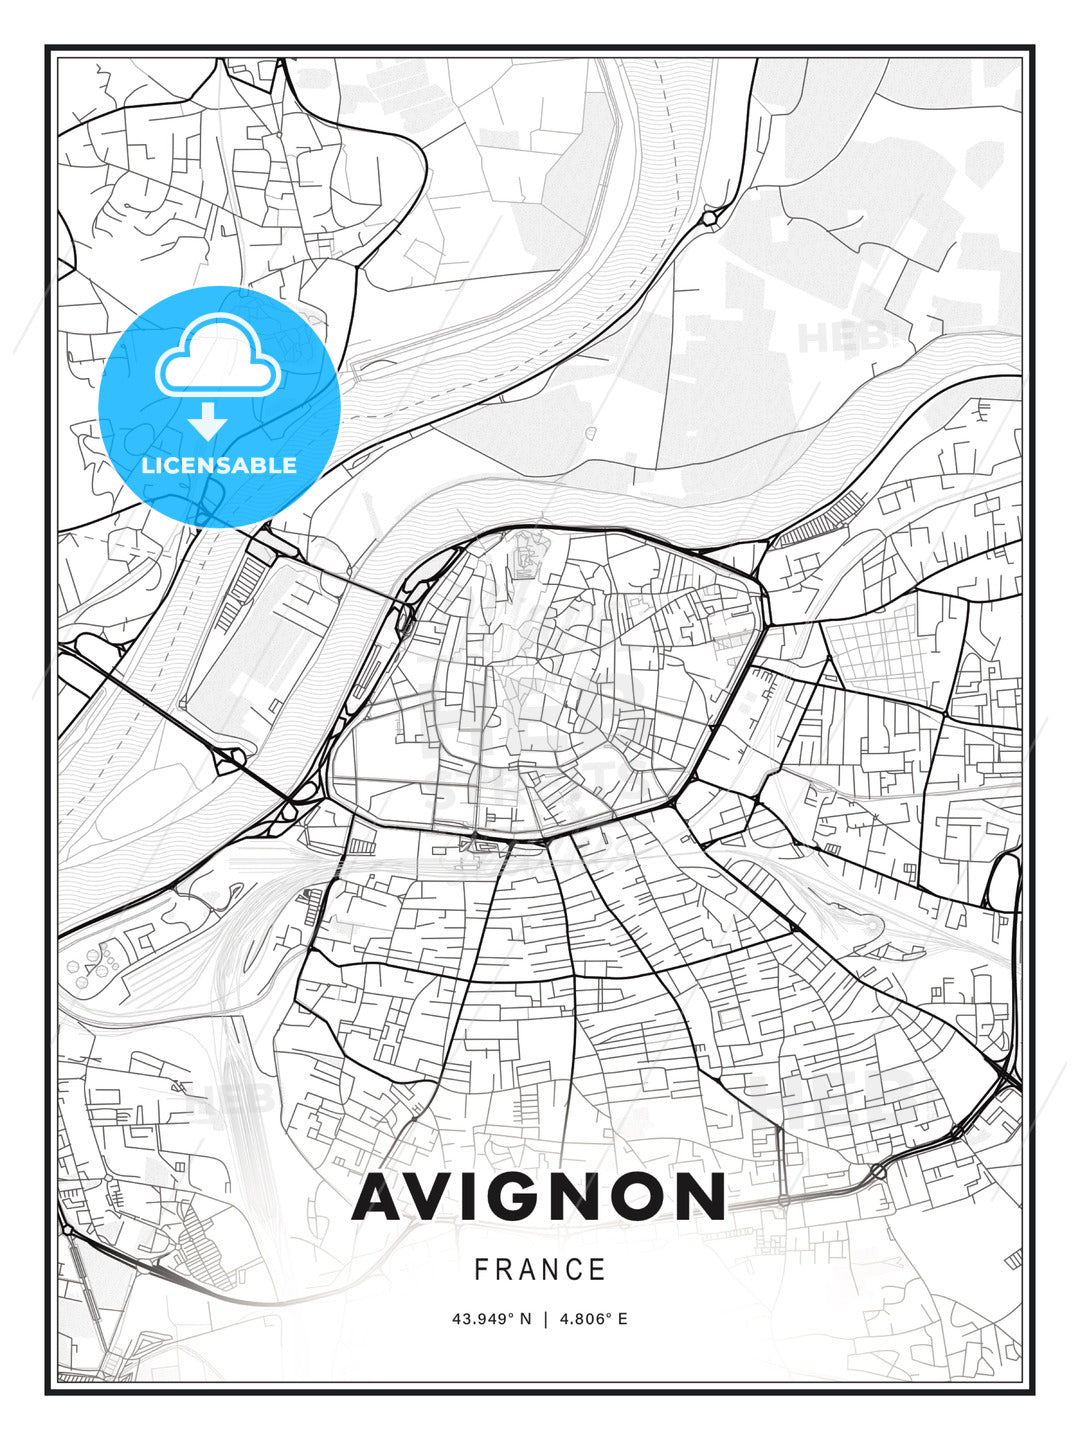 Avignon, France, Modern Print Template in Various Formats - HEBSTREITS Sketches